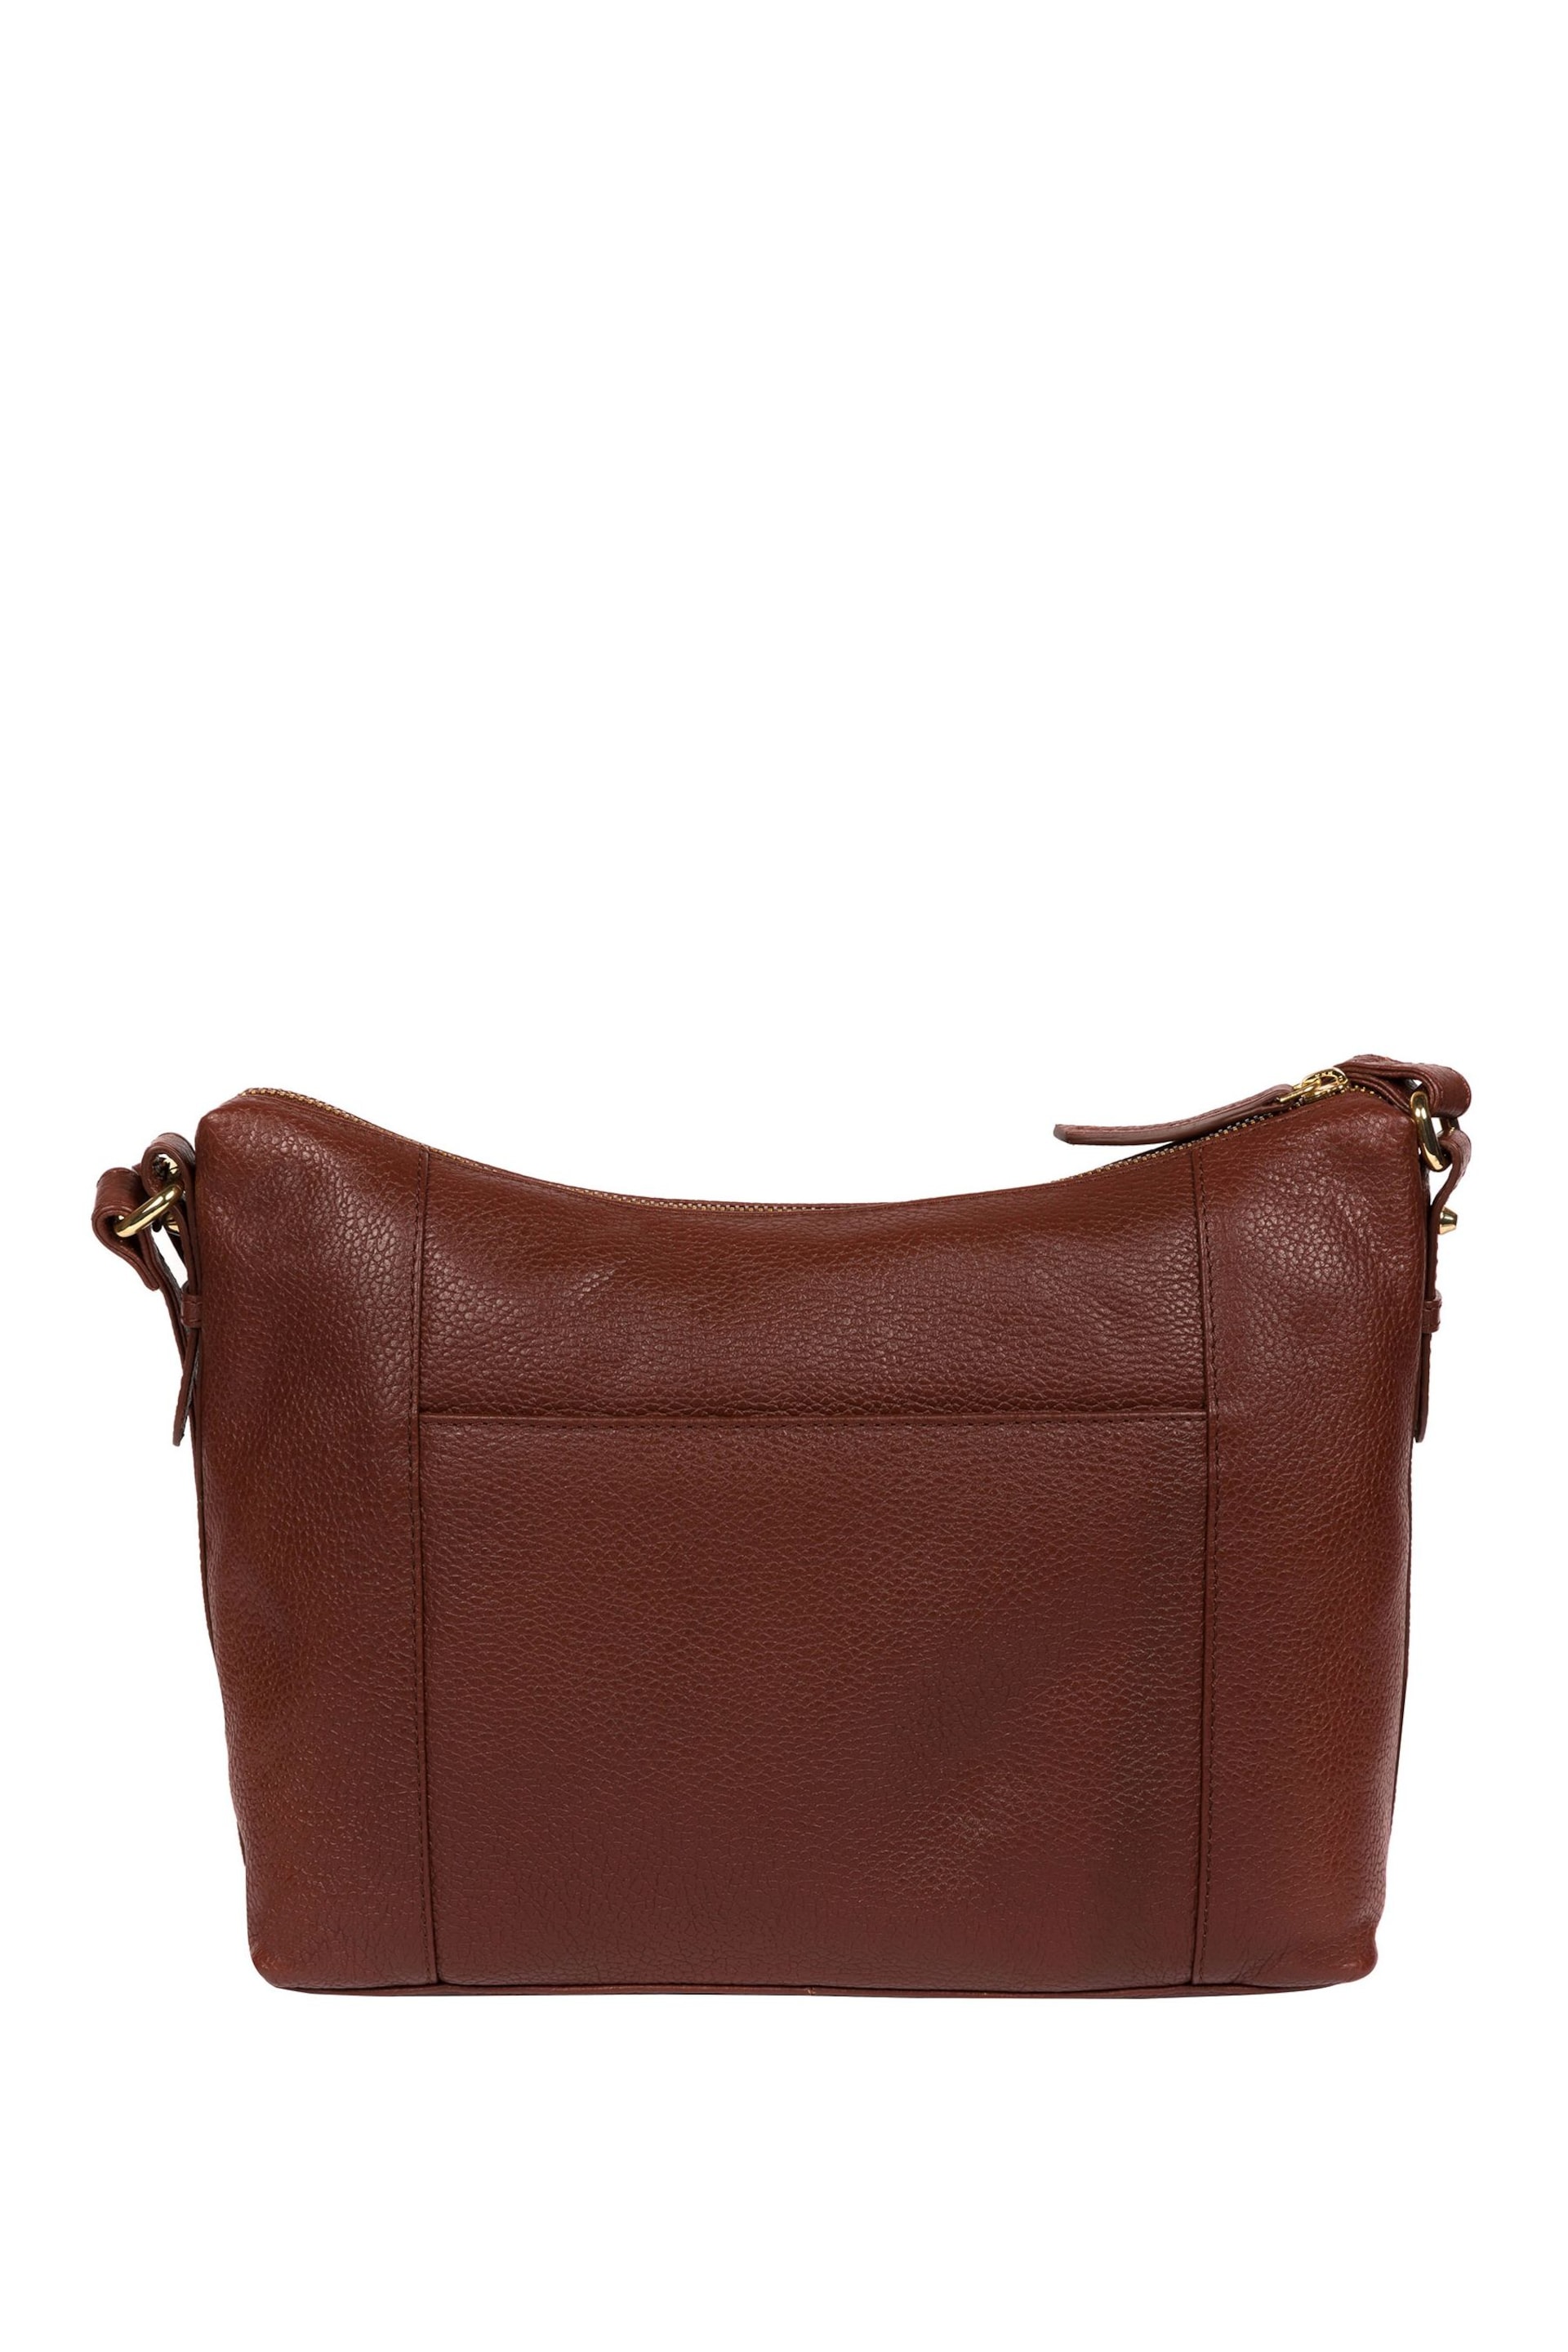 Pure Luxuries London Jenna Leather Shoulder Bag - Image 2 of 5